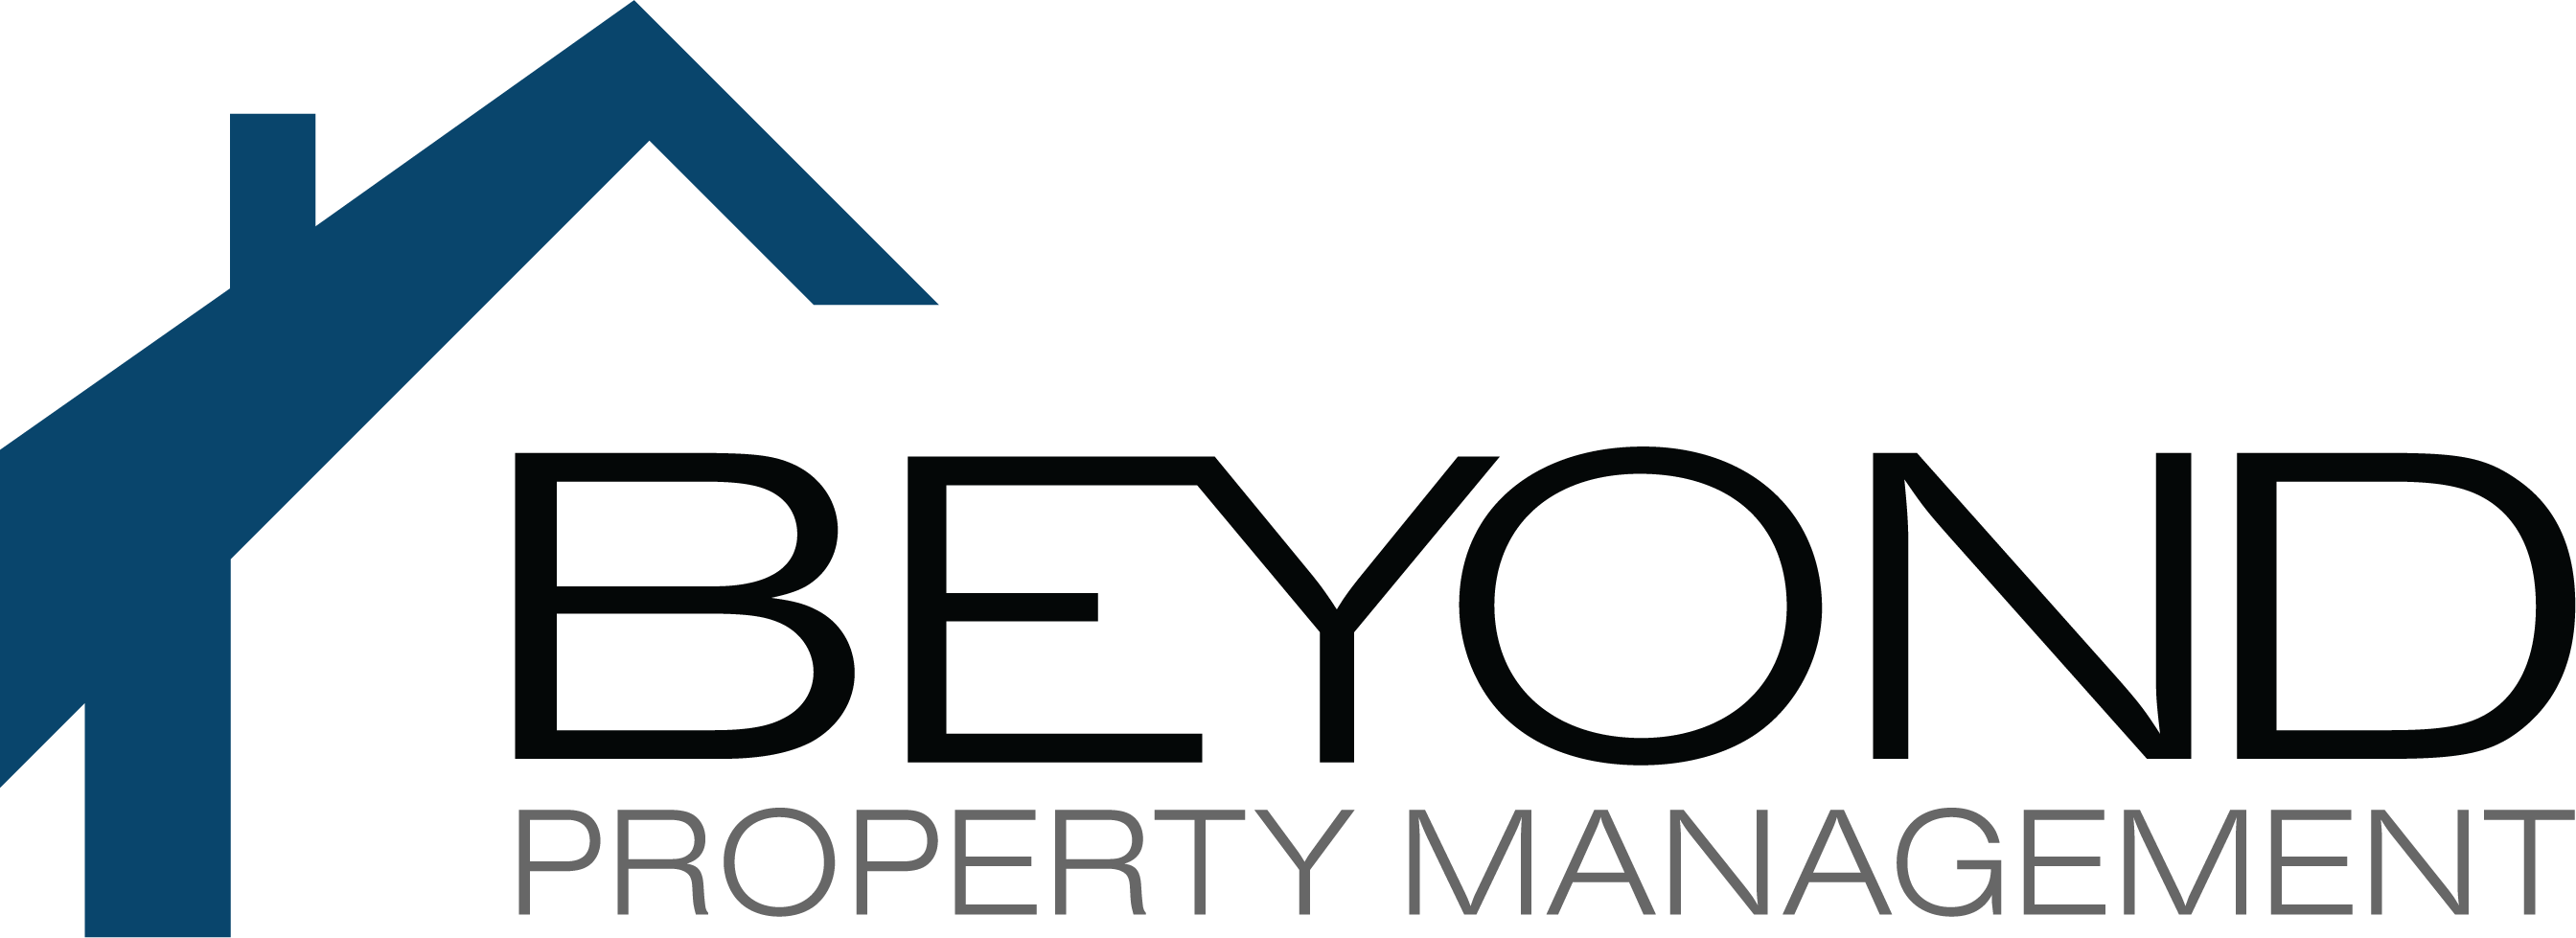 Property Management Company Logo - Residential Property Management Company & Consultants San Diego